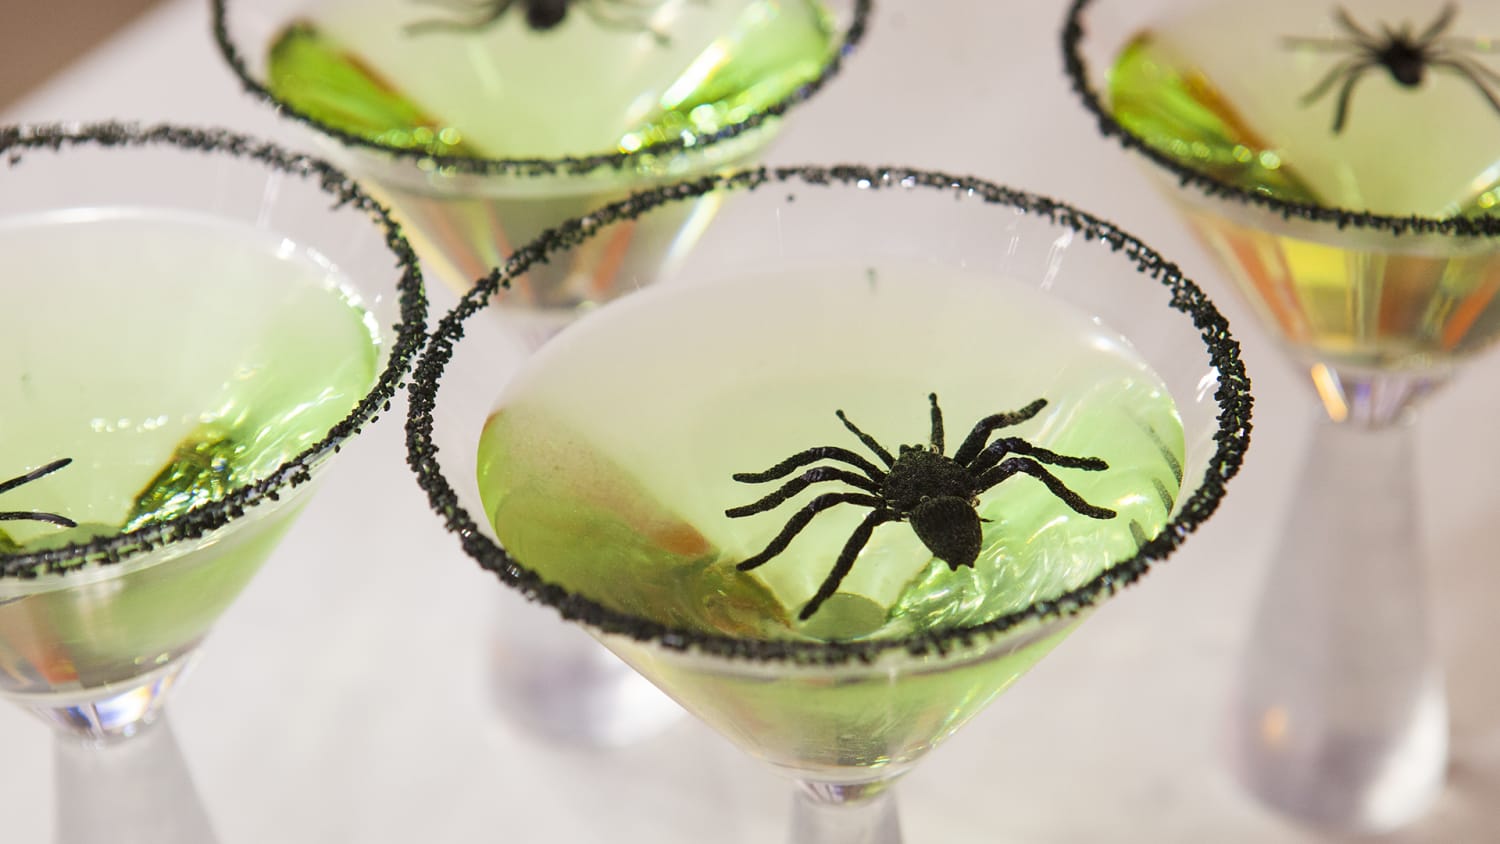 Witches Stew Halloween Martini Glass 